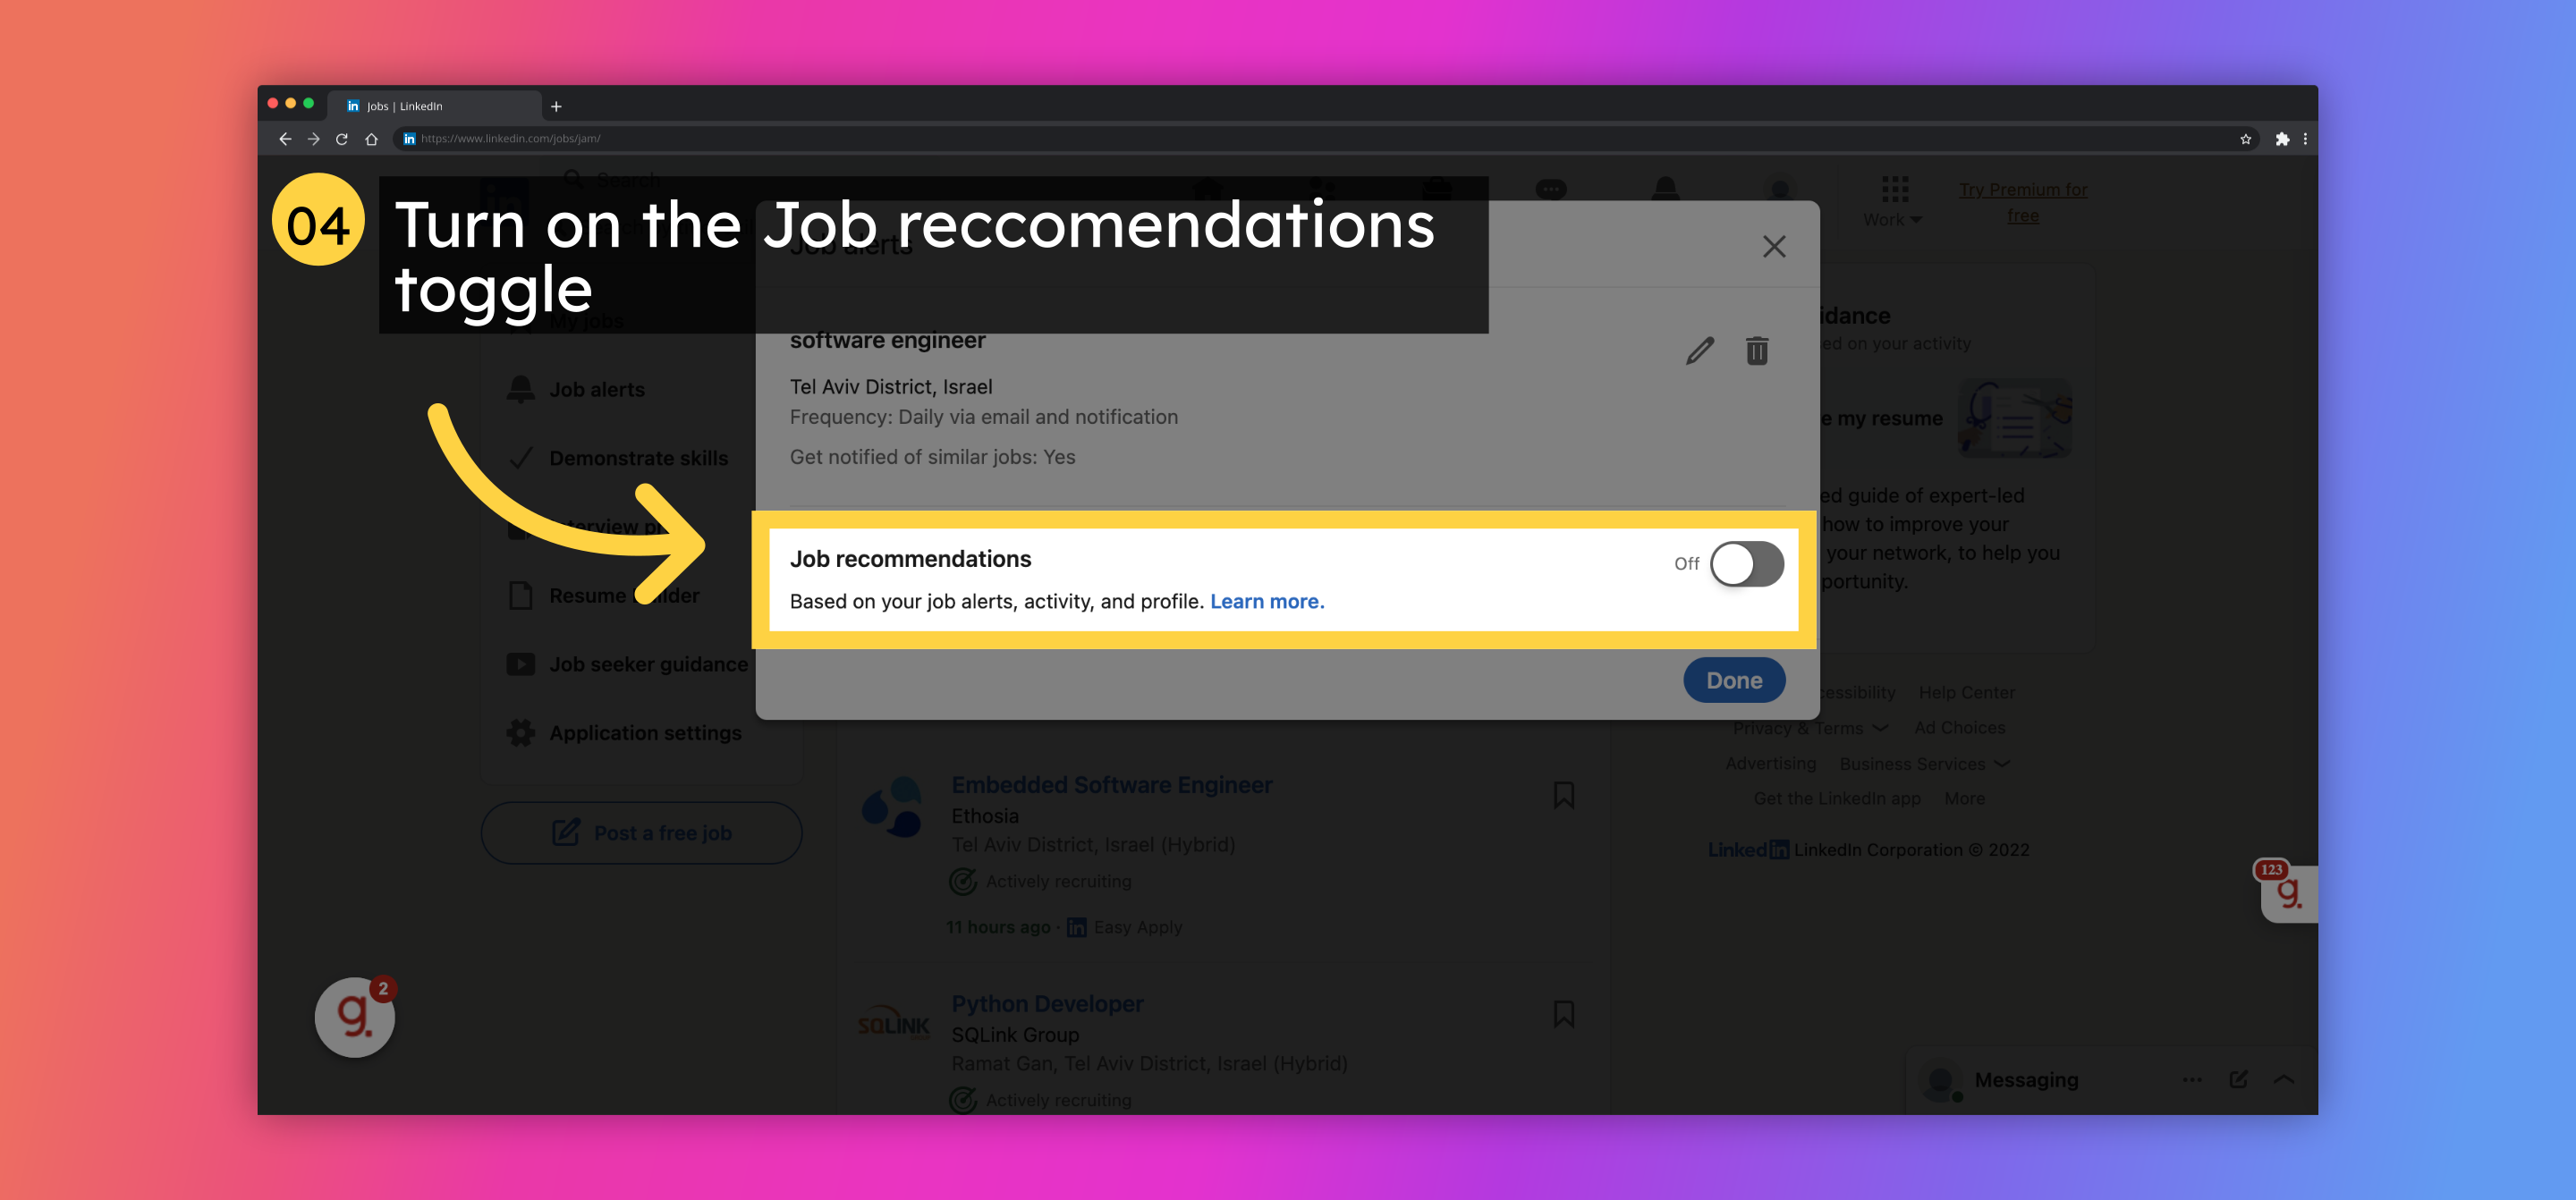 Turn on the Job reccomendations toggle